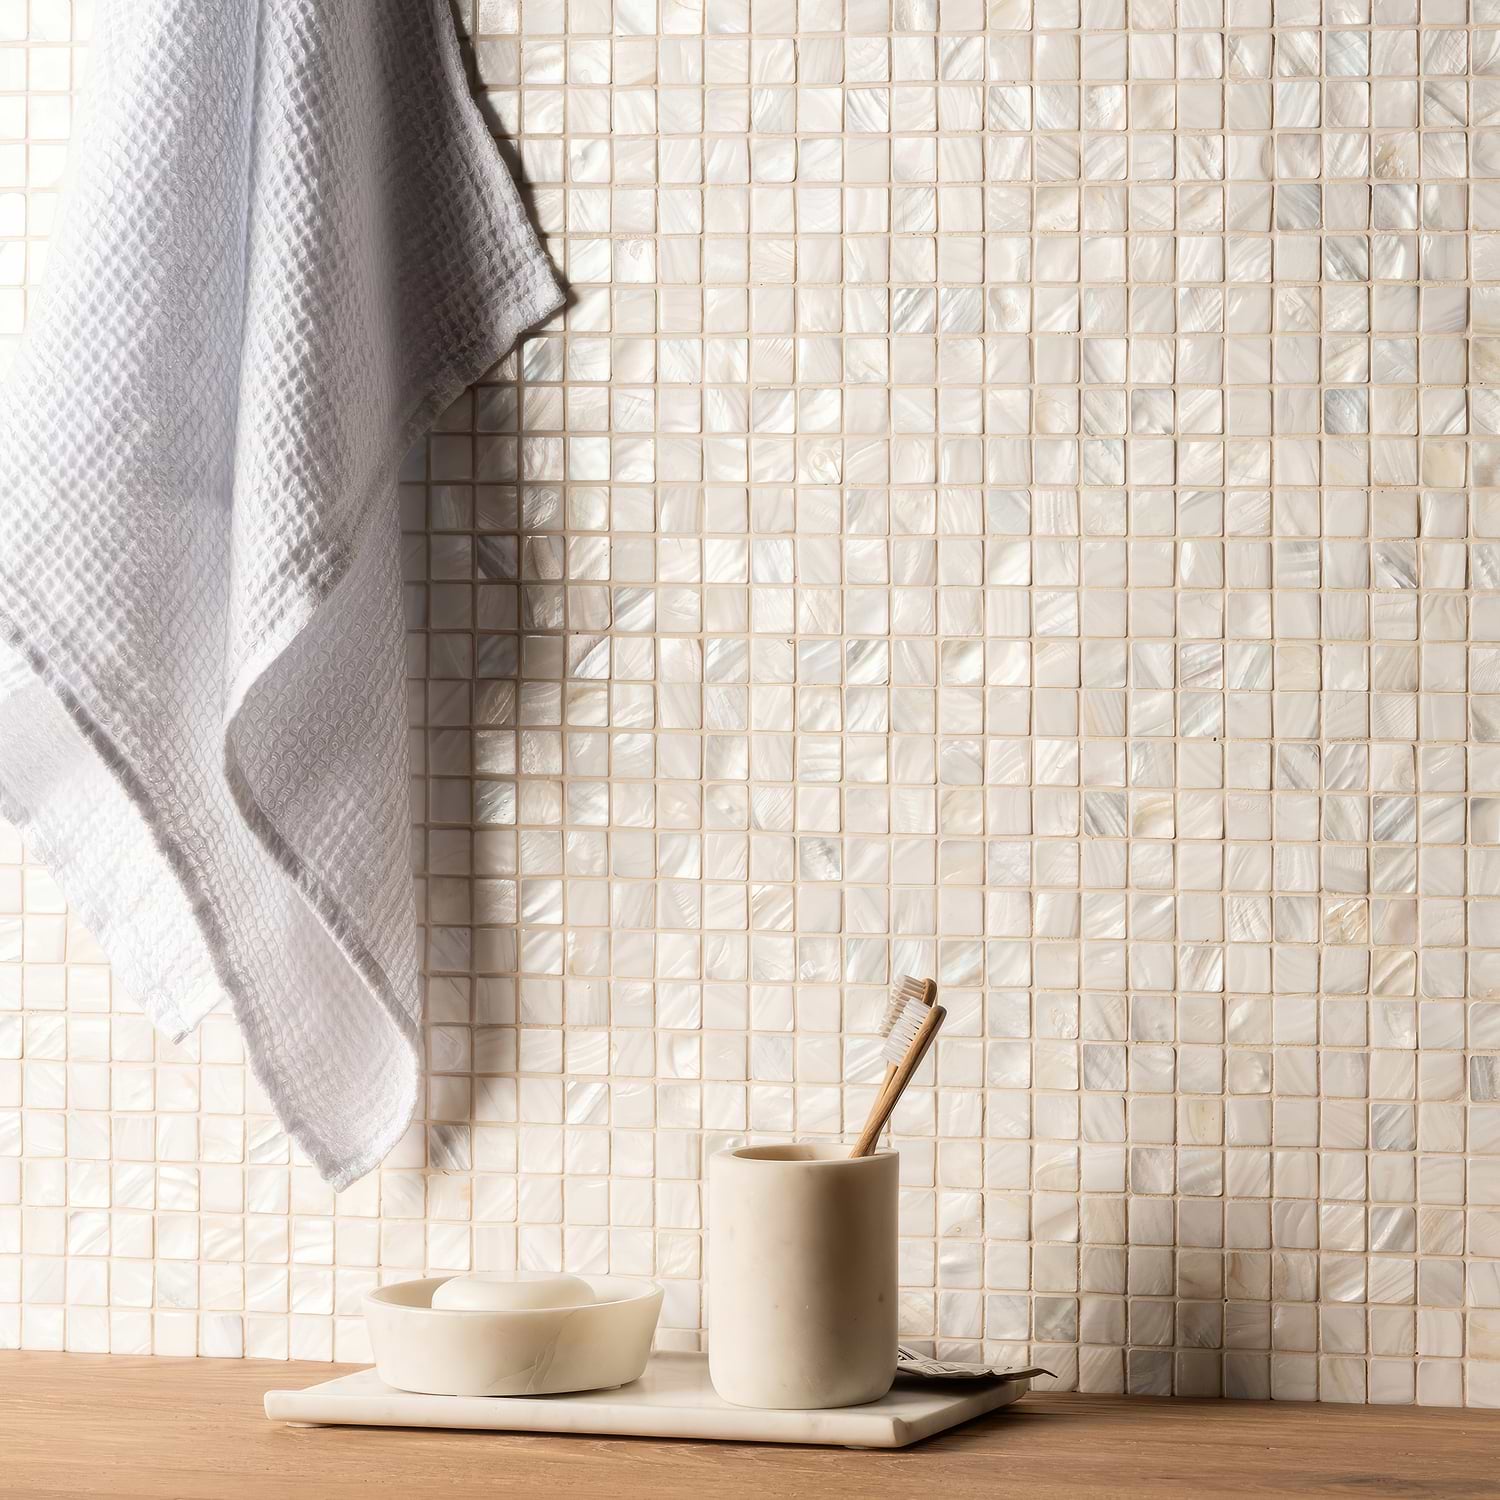 Pearl Shell Mosaic - Hyperion Tiles